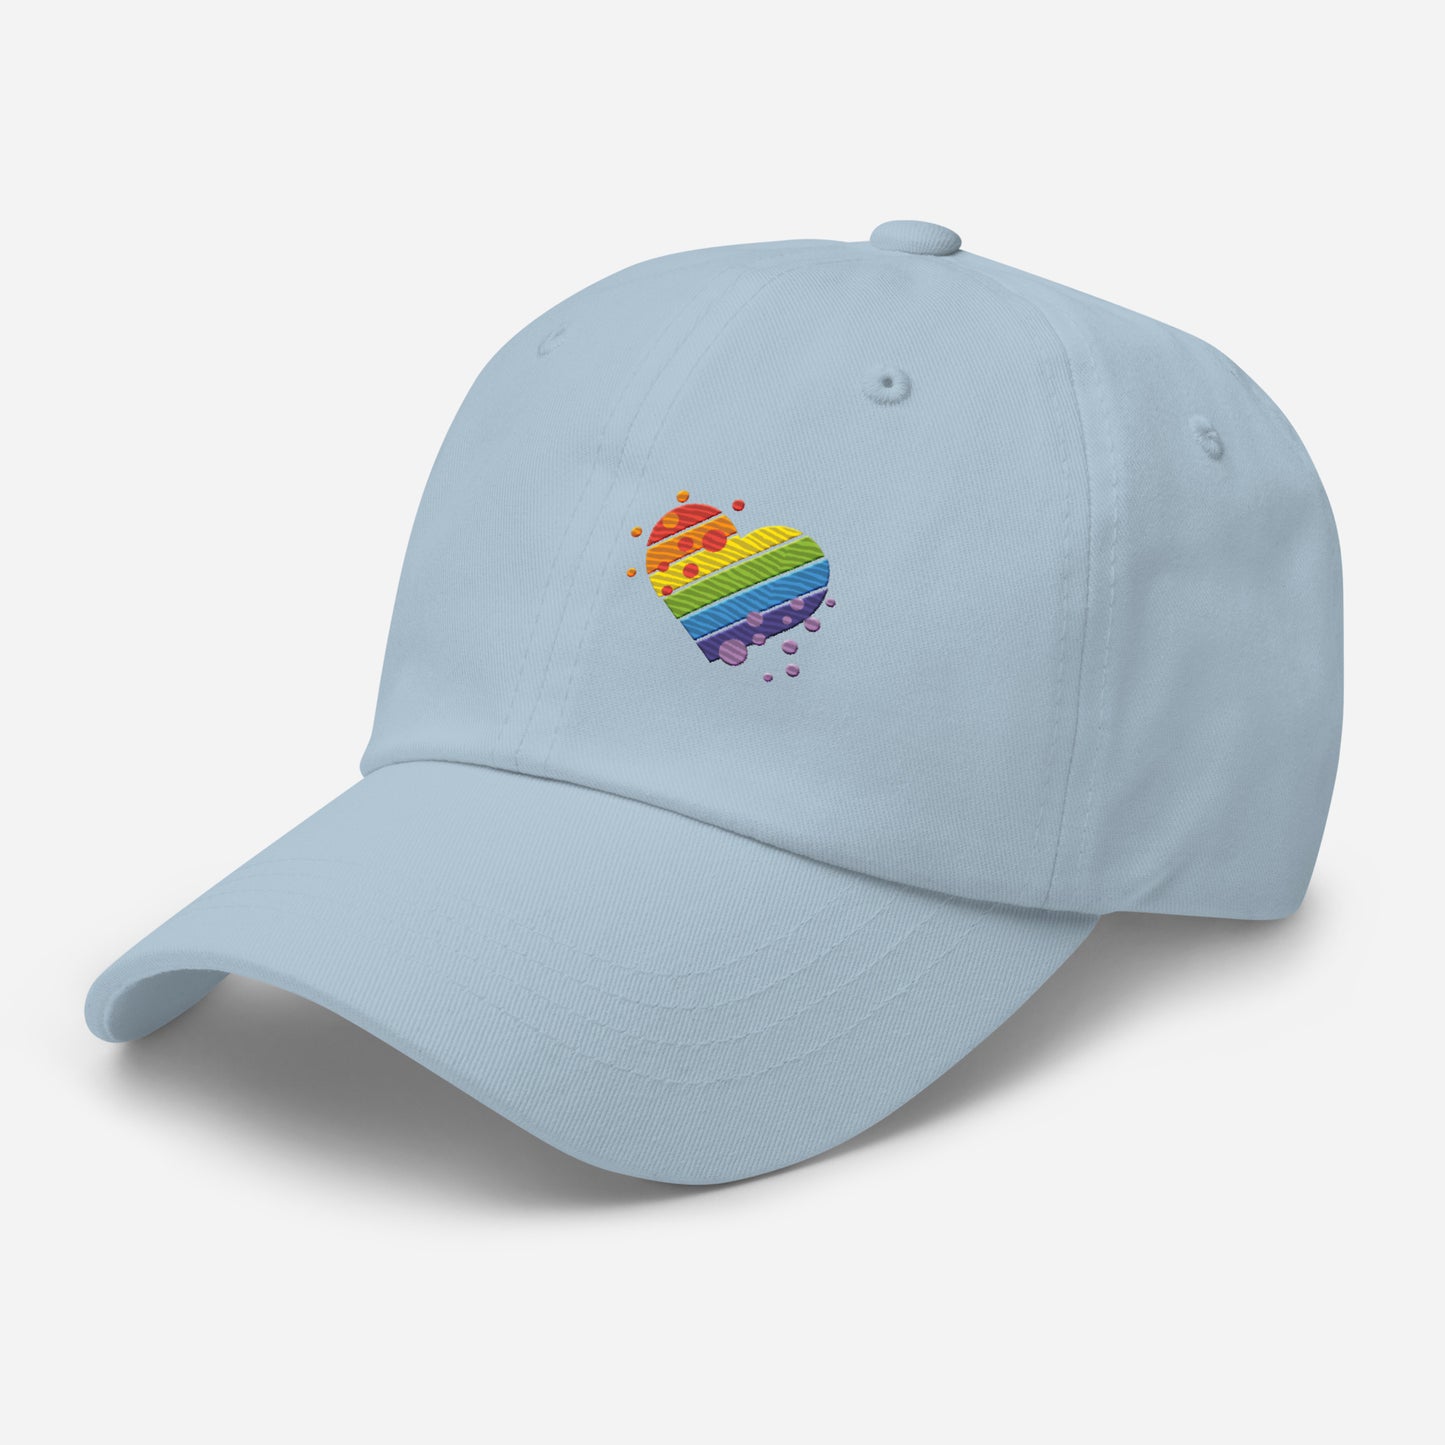 Light blue baseball hat featuring rainbow heart design embroidery with a low profile, adjustable strap.